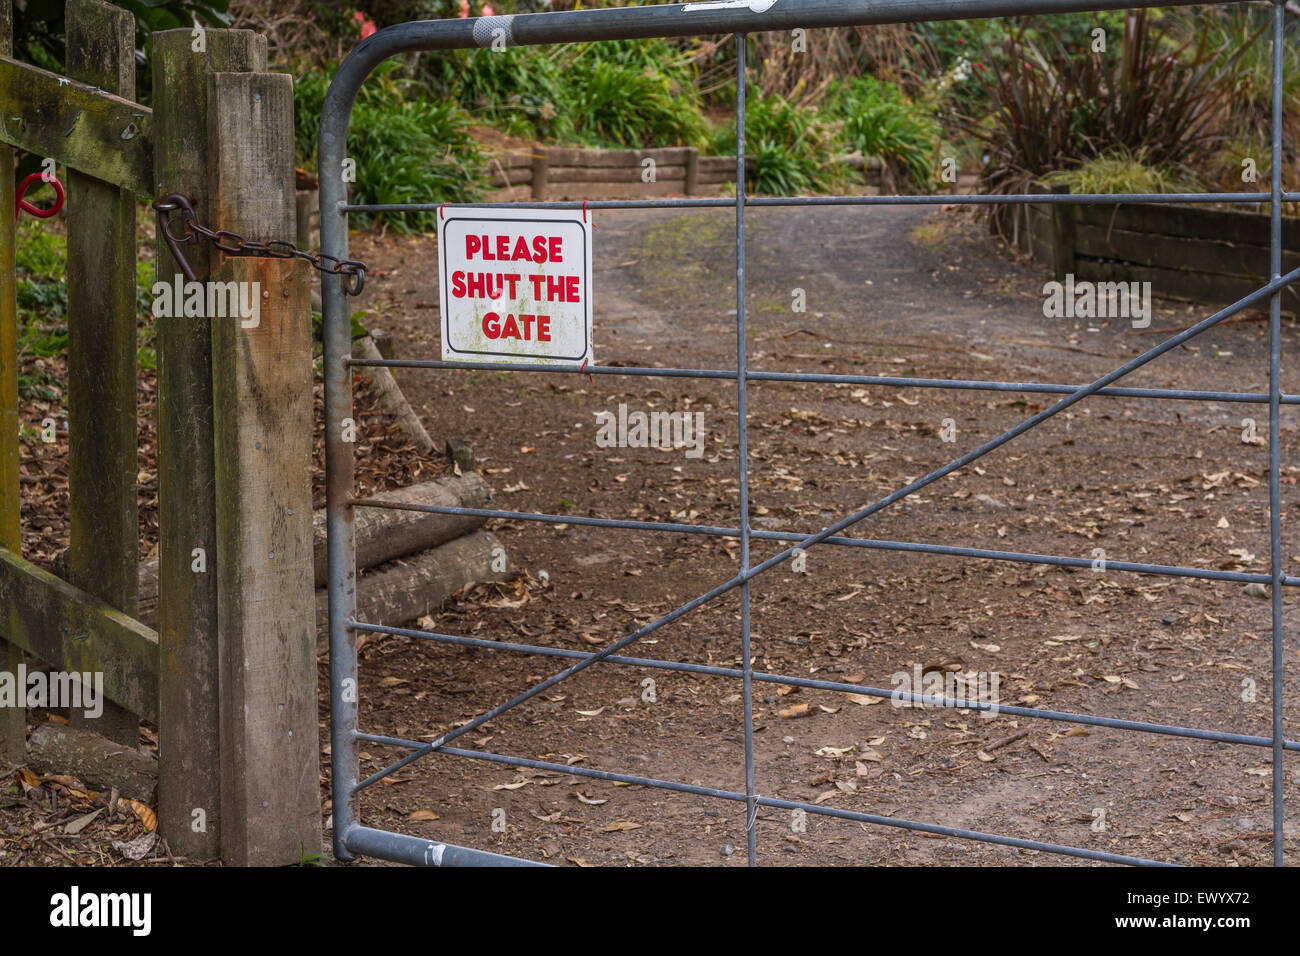 Farm gate with shut the gate sign Stock Photo